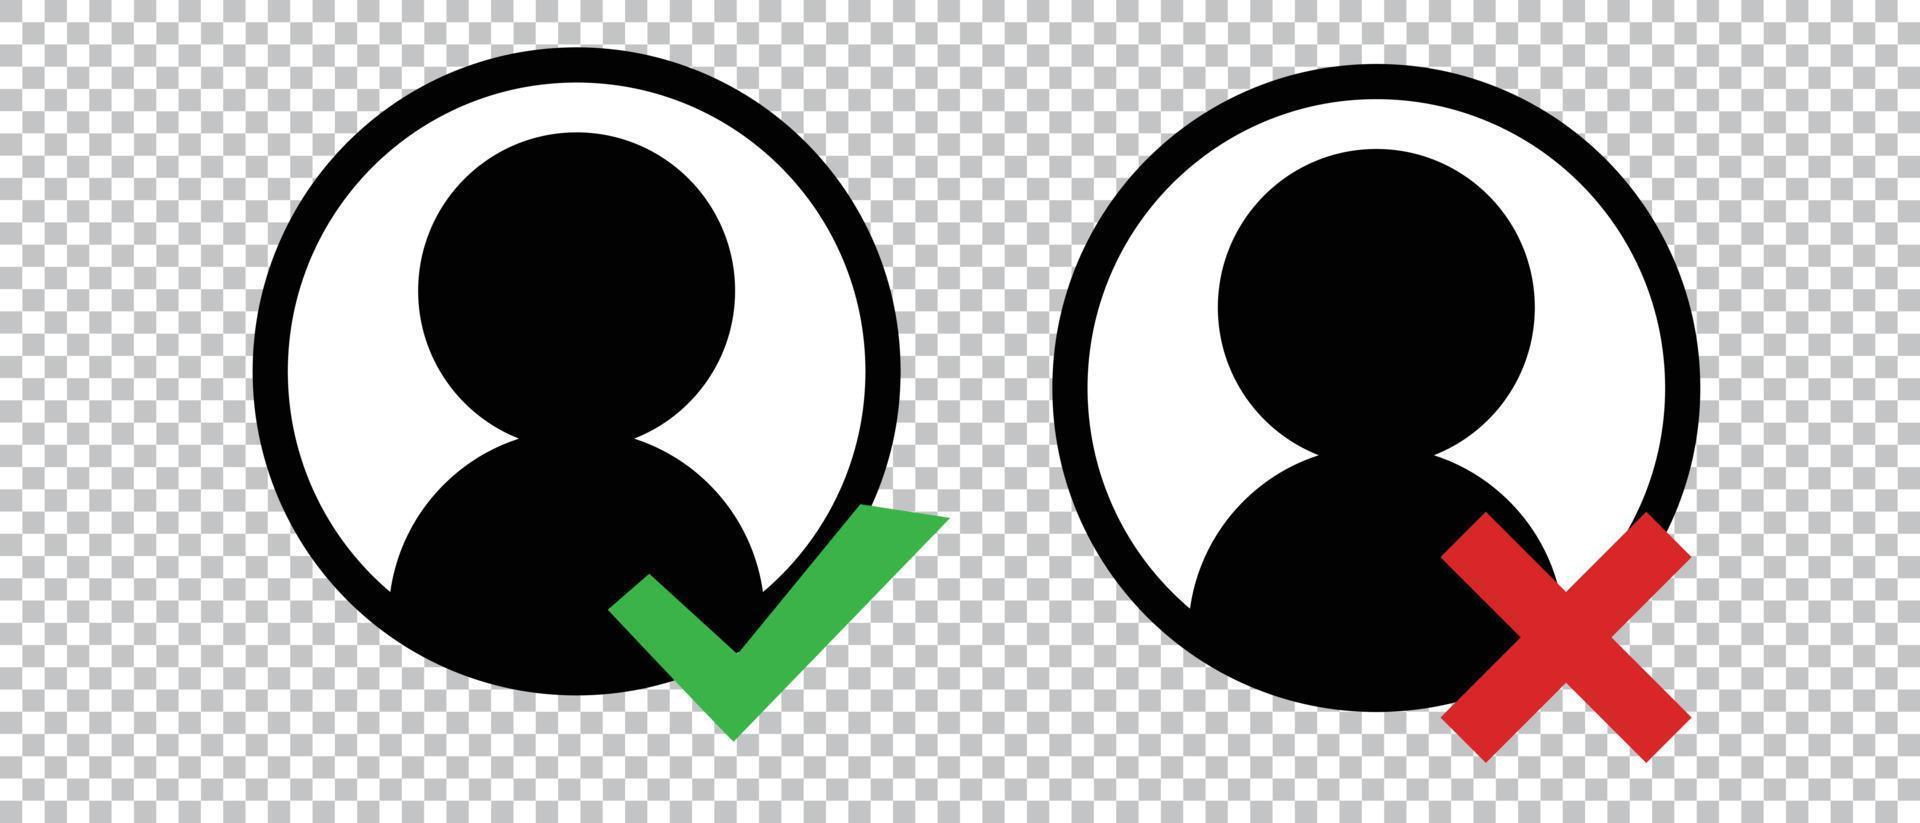 Round user icon with checkmark and crossmark. It is a simple vector. vector